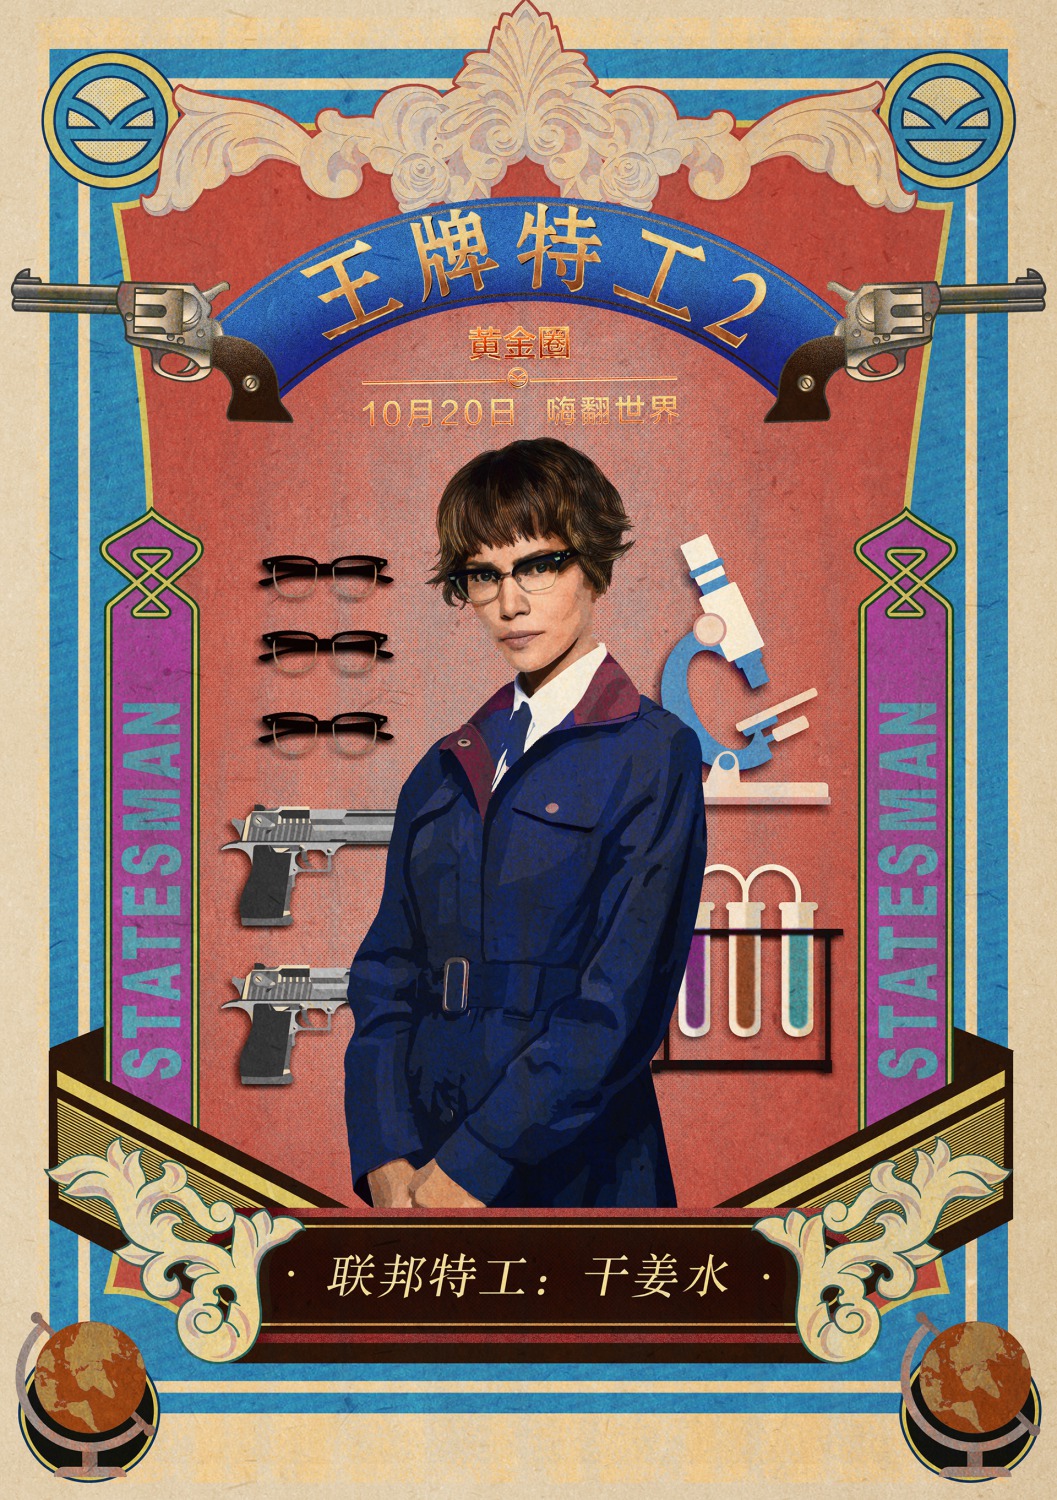 Extra Large Movie Poster Image for Kingsman: The Golden Circle (#40 of 41)